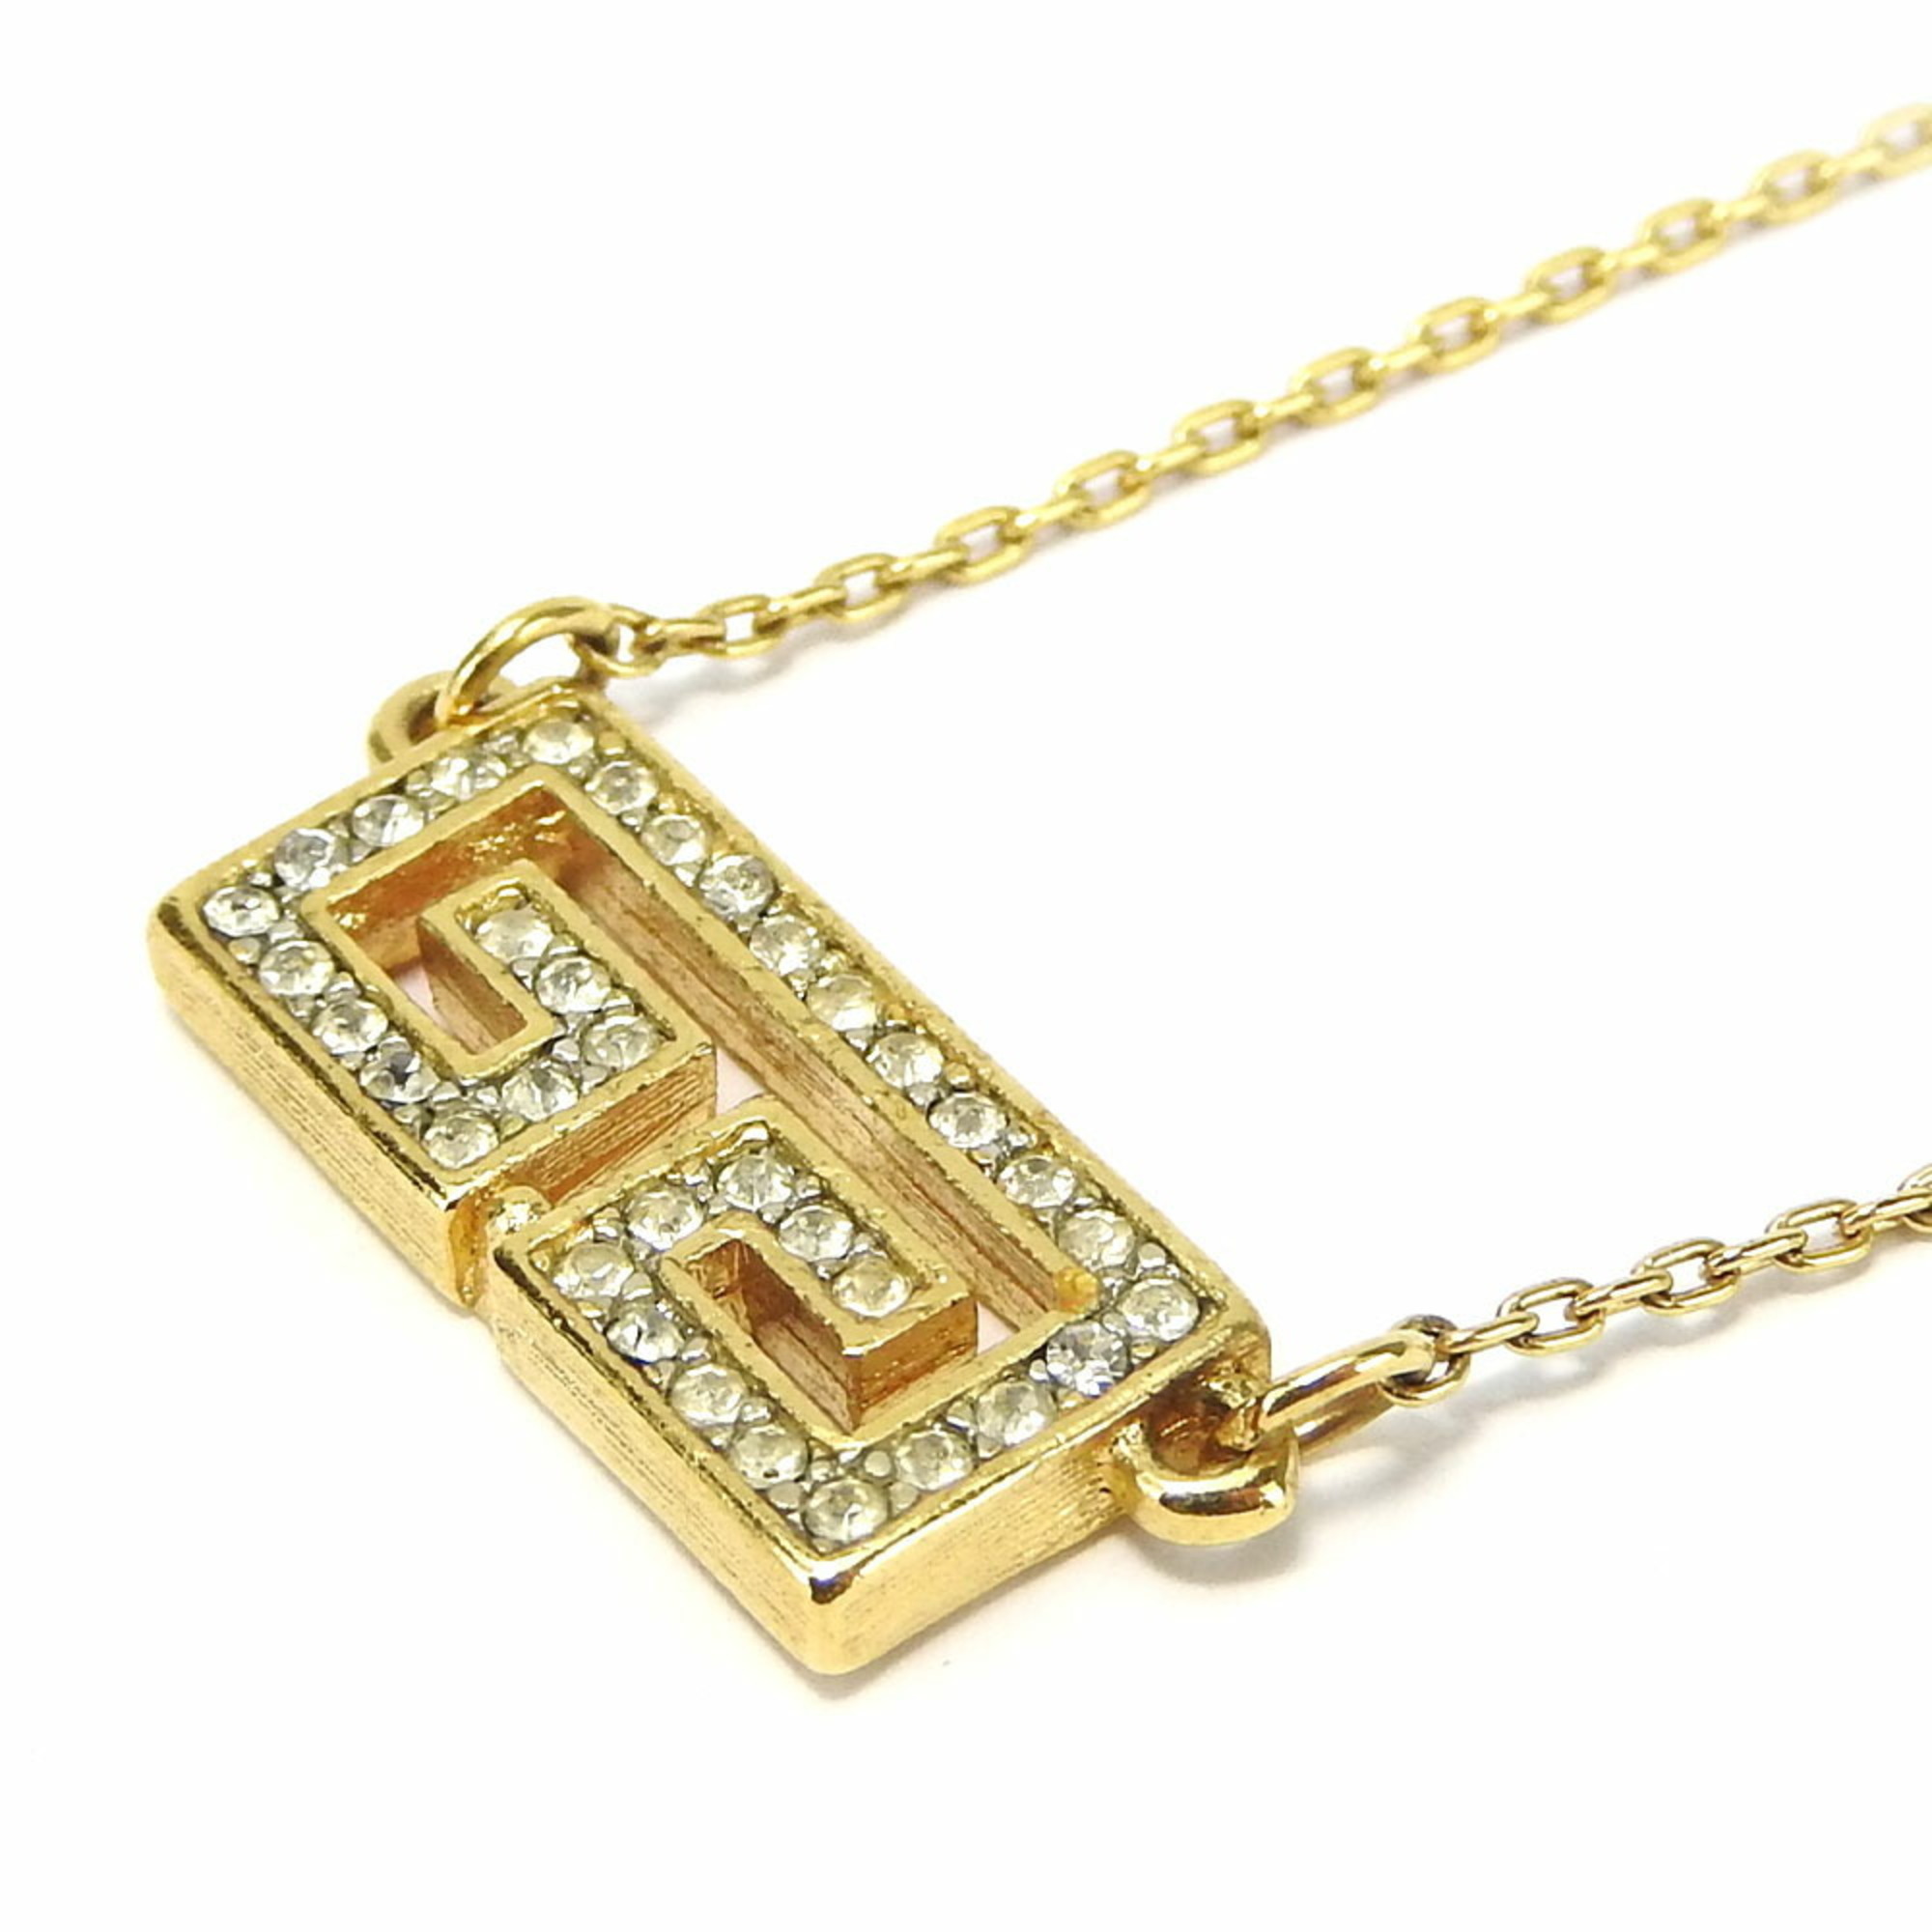 Givenchy Necklace Metal Gold Plated Rhinestone Women's